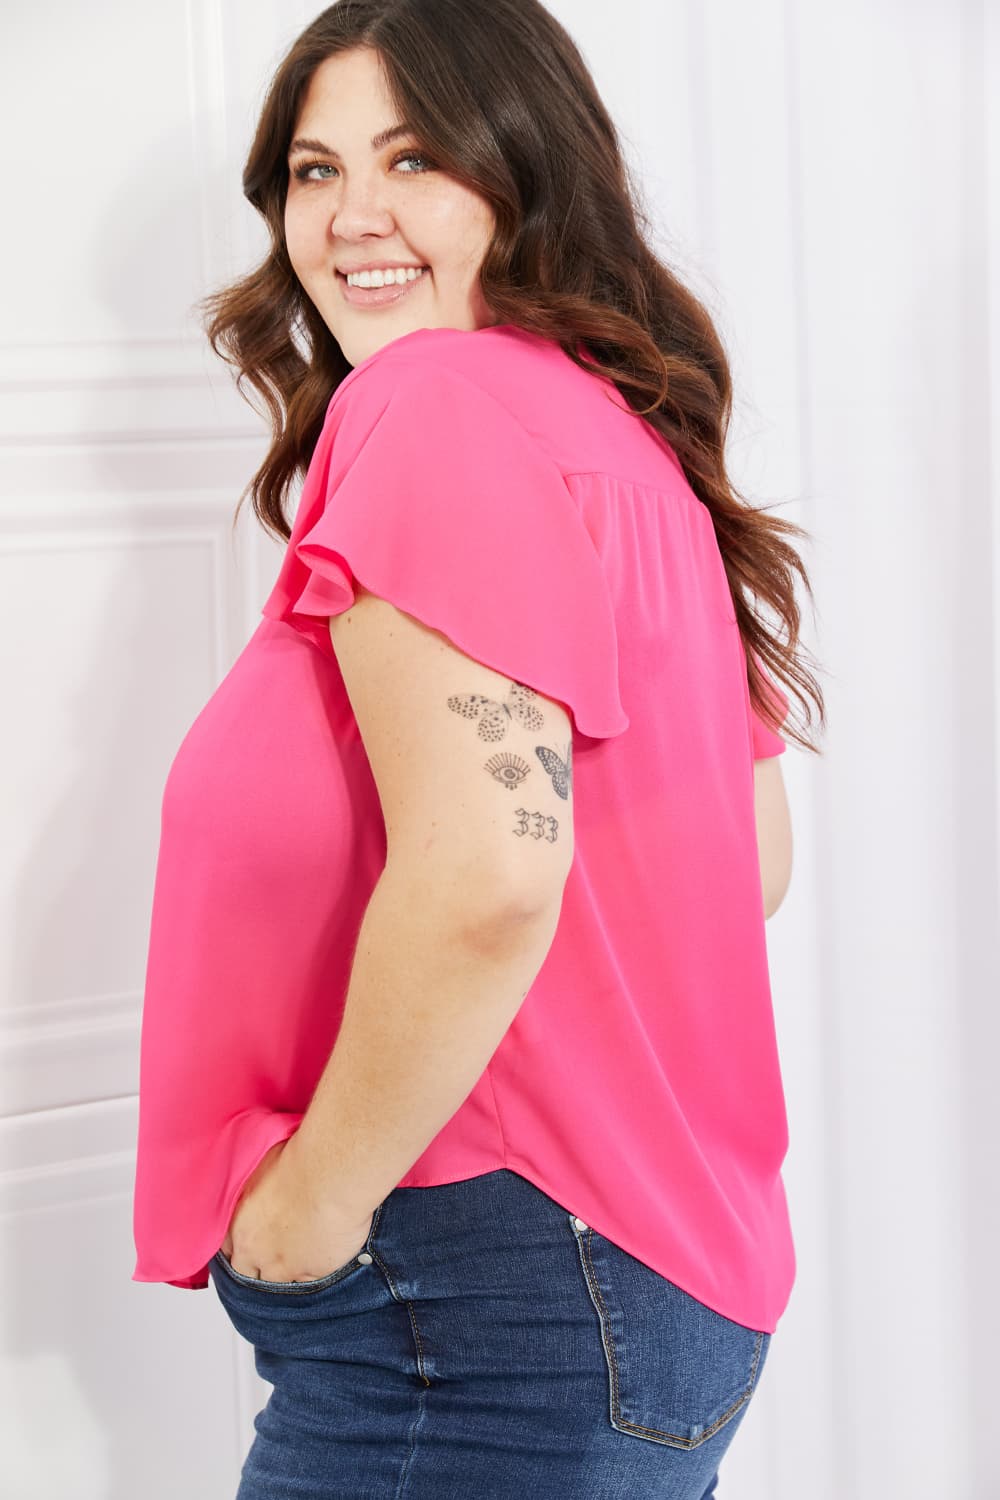 Sew In Love Just For You Full Size Short Ruffled sleeve length Top in Hot Pink BLUE ZONE PLANET